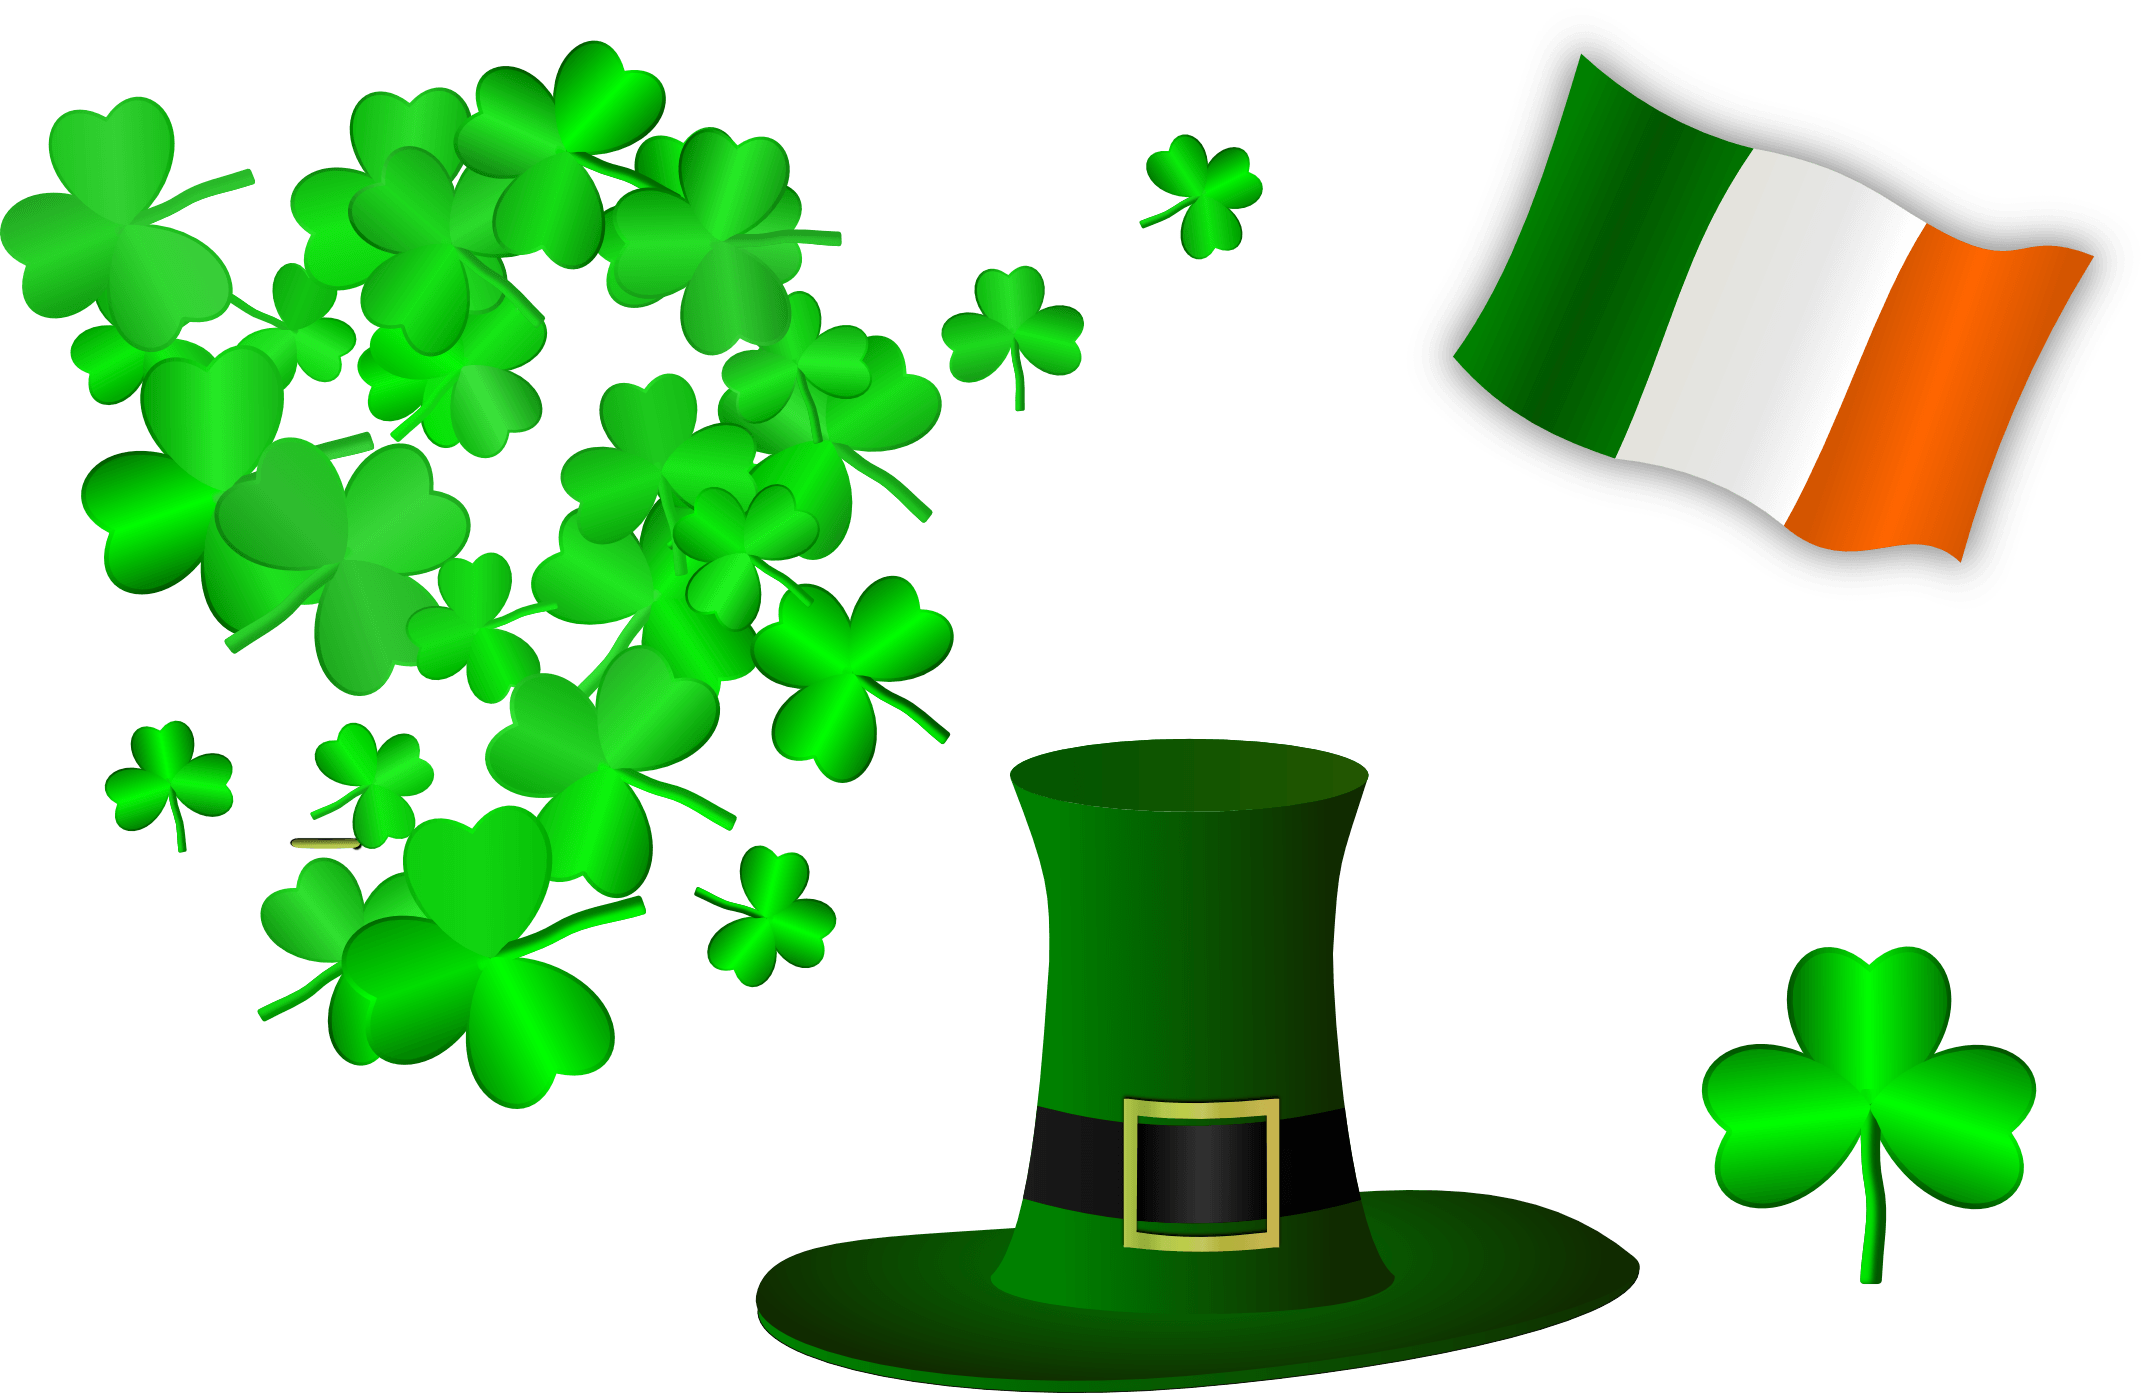 Saint Patrick's Day 2019 Wallpapers - Wallpaper Cave